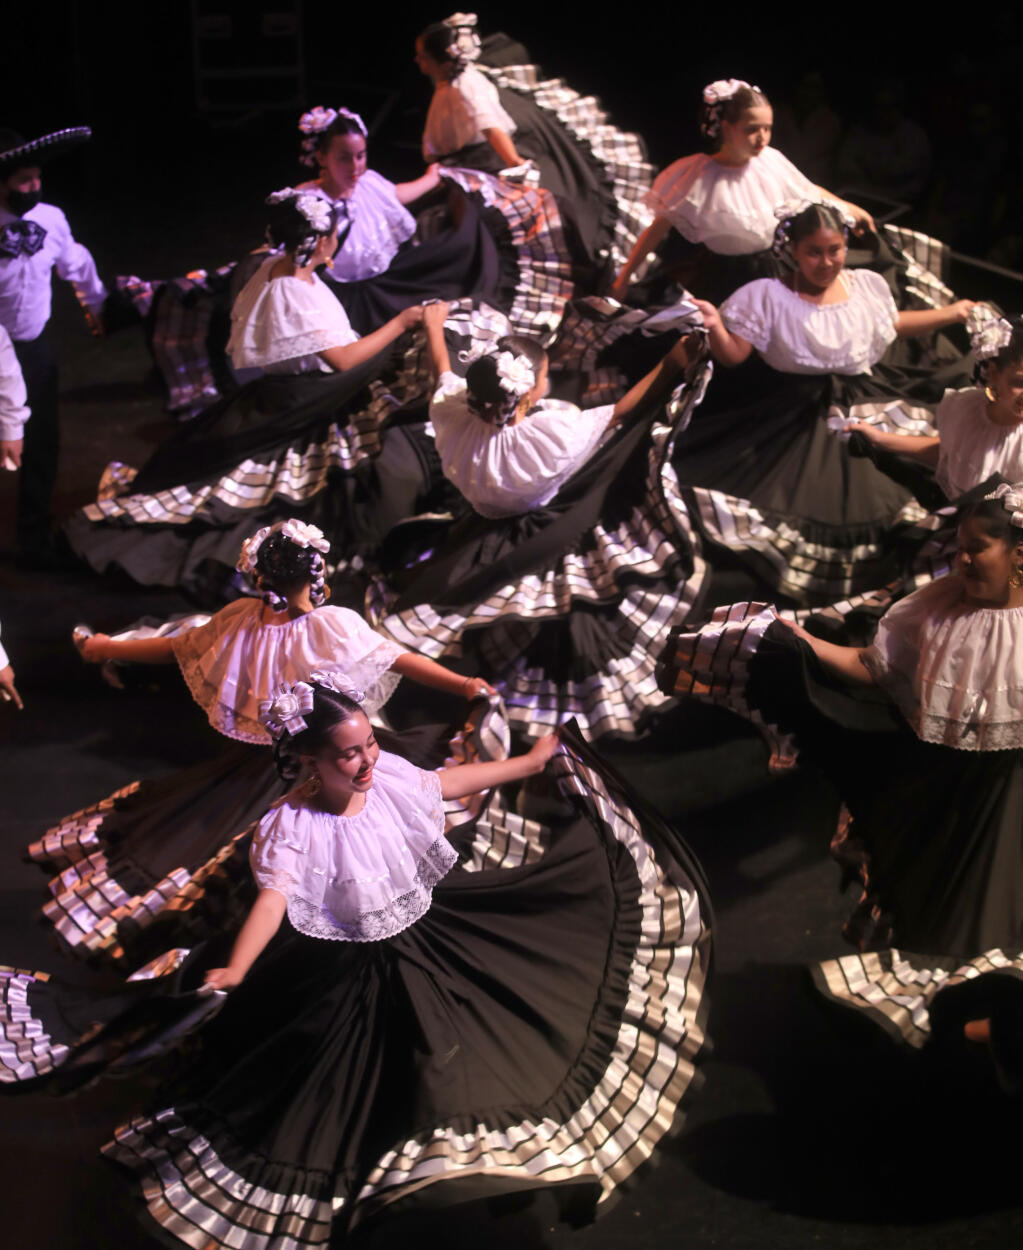 Ballet Folklorico dancers perform during the youth mariachi program at the Luther Burbank Center for the Arts, Friday, July 22, 2022 in Santa Rosa  (Kent Porter / The Press Democrat) 2022